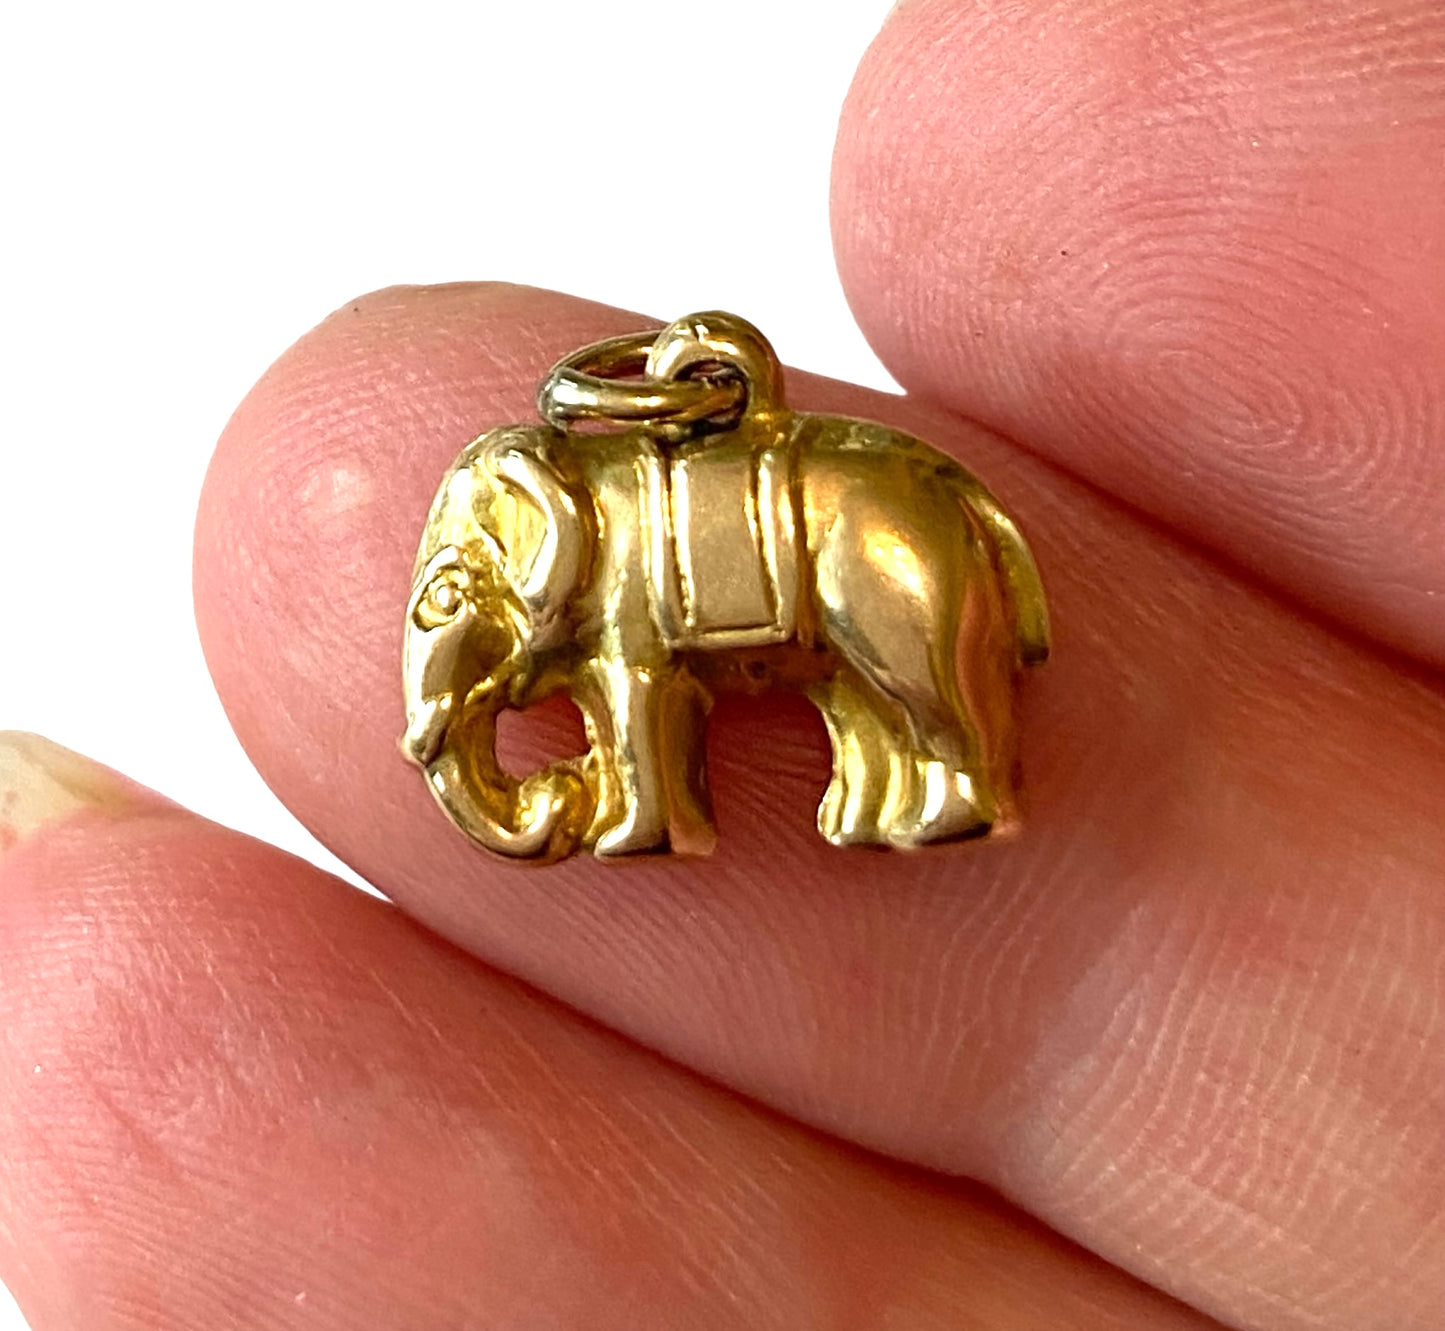 9ct vintage elephant charm VERY small , yellow gold and hollow